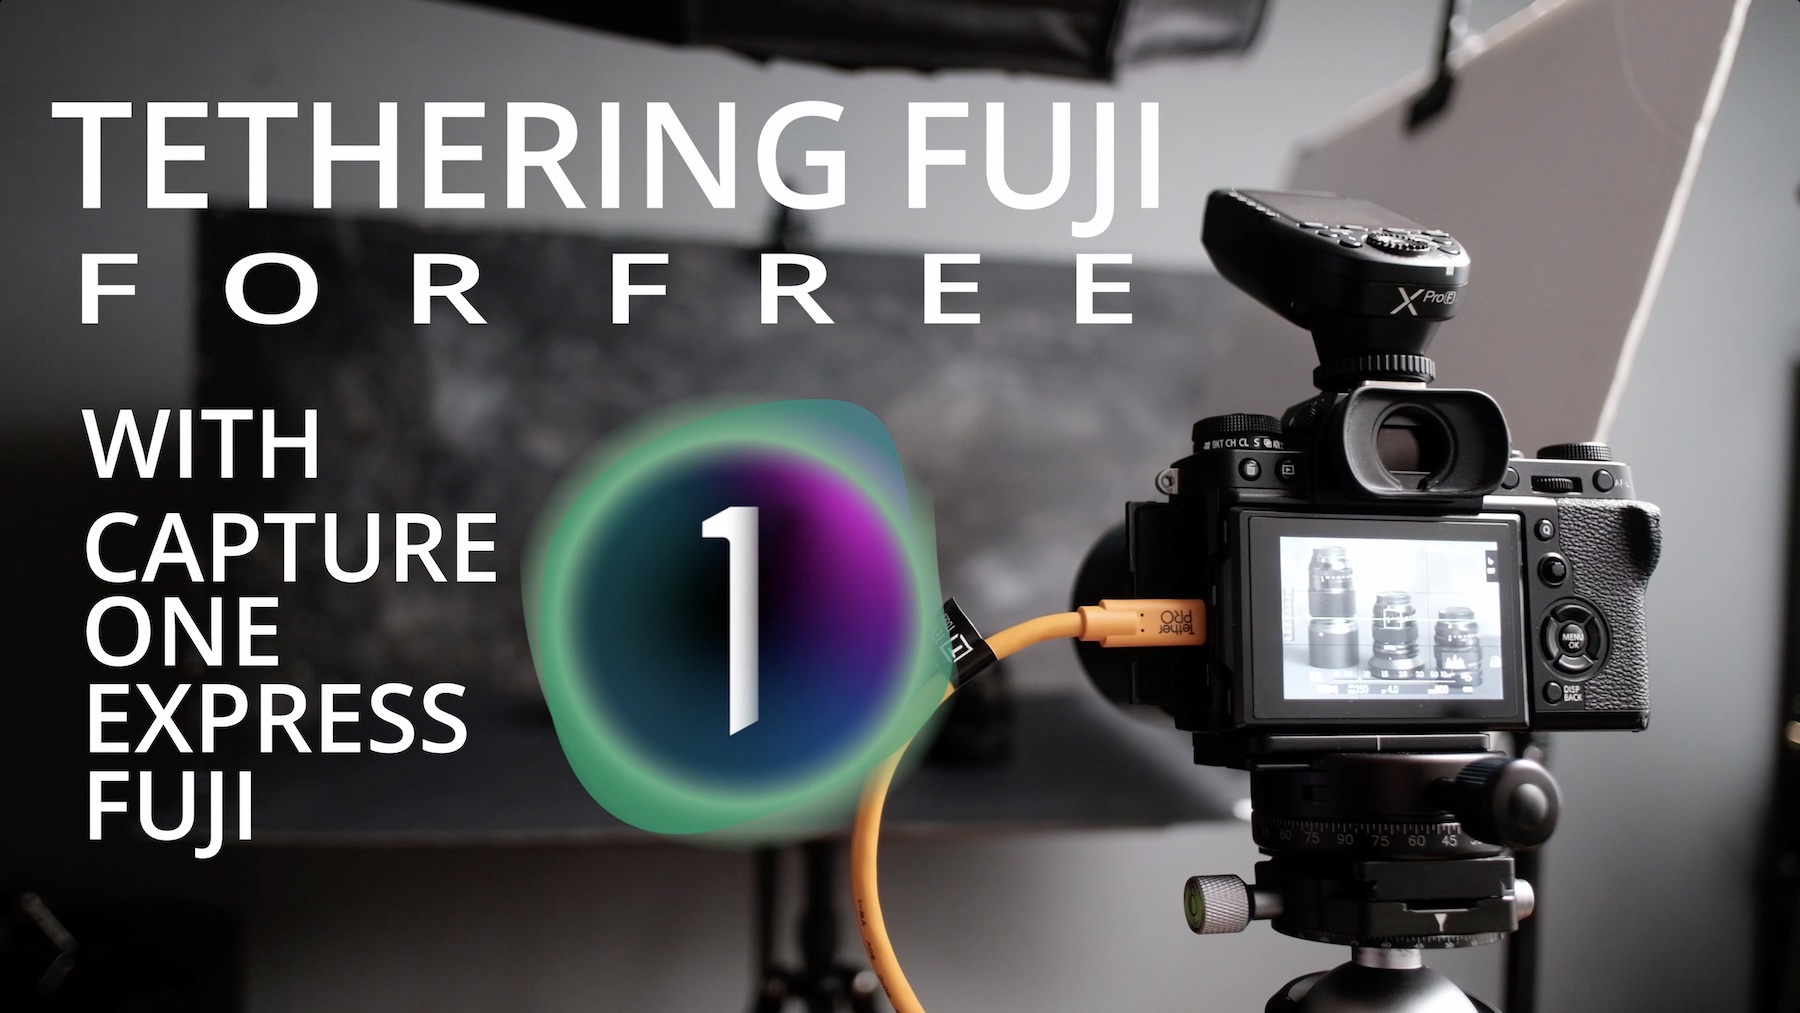 Tethering with Fuji for FREE, Capture One Express